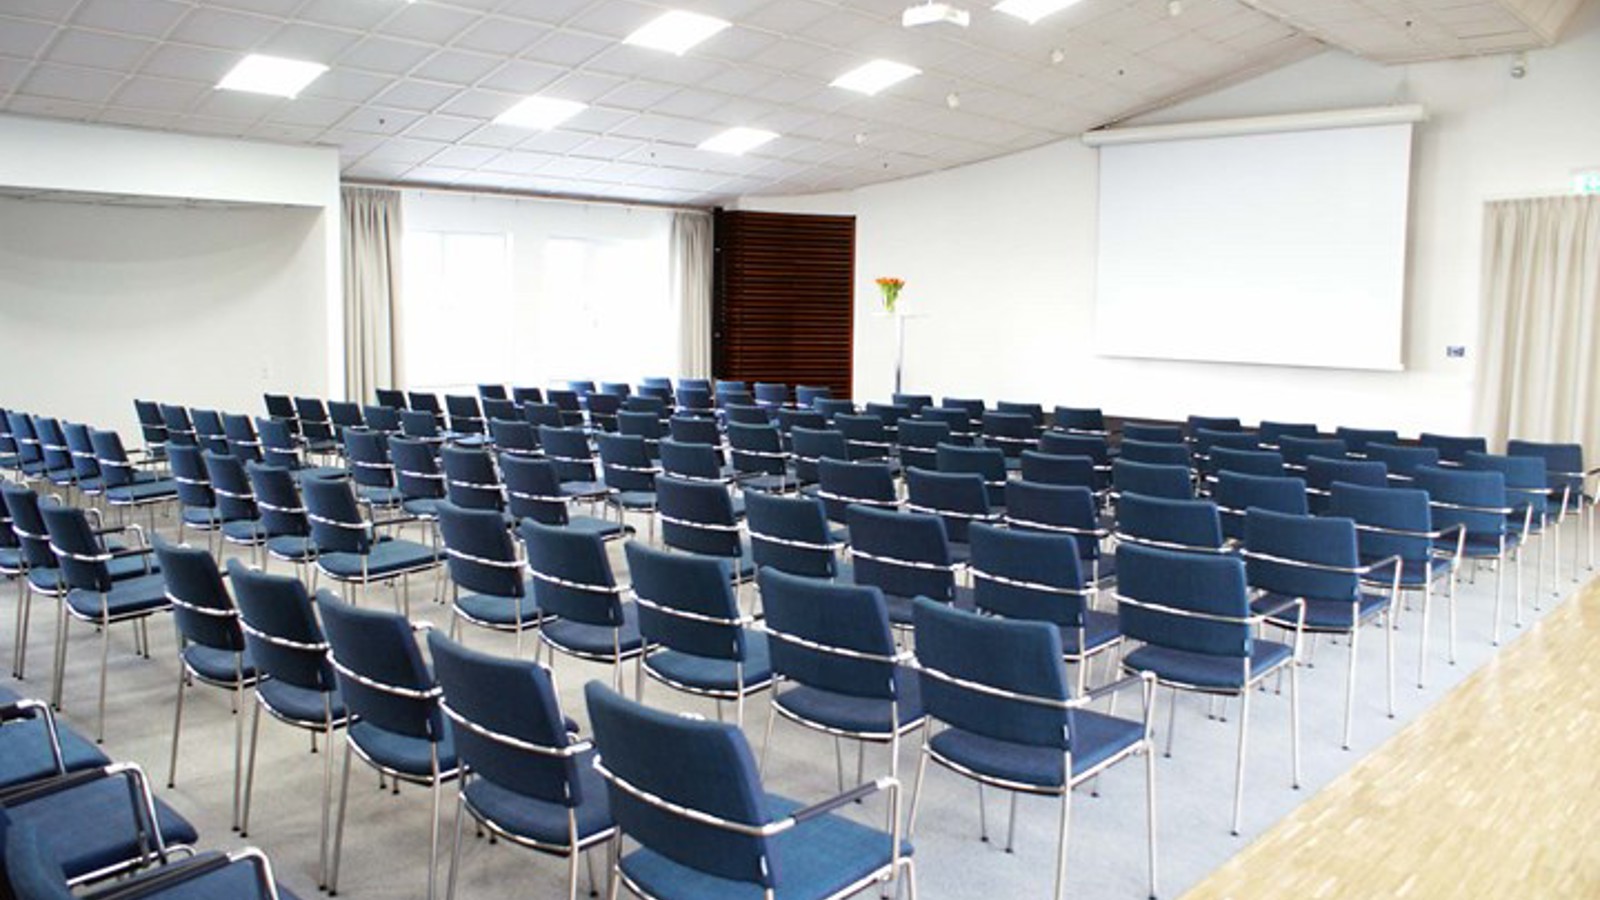 Conference room with lined up chairs, white walls and a projector